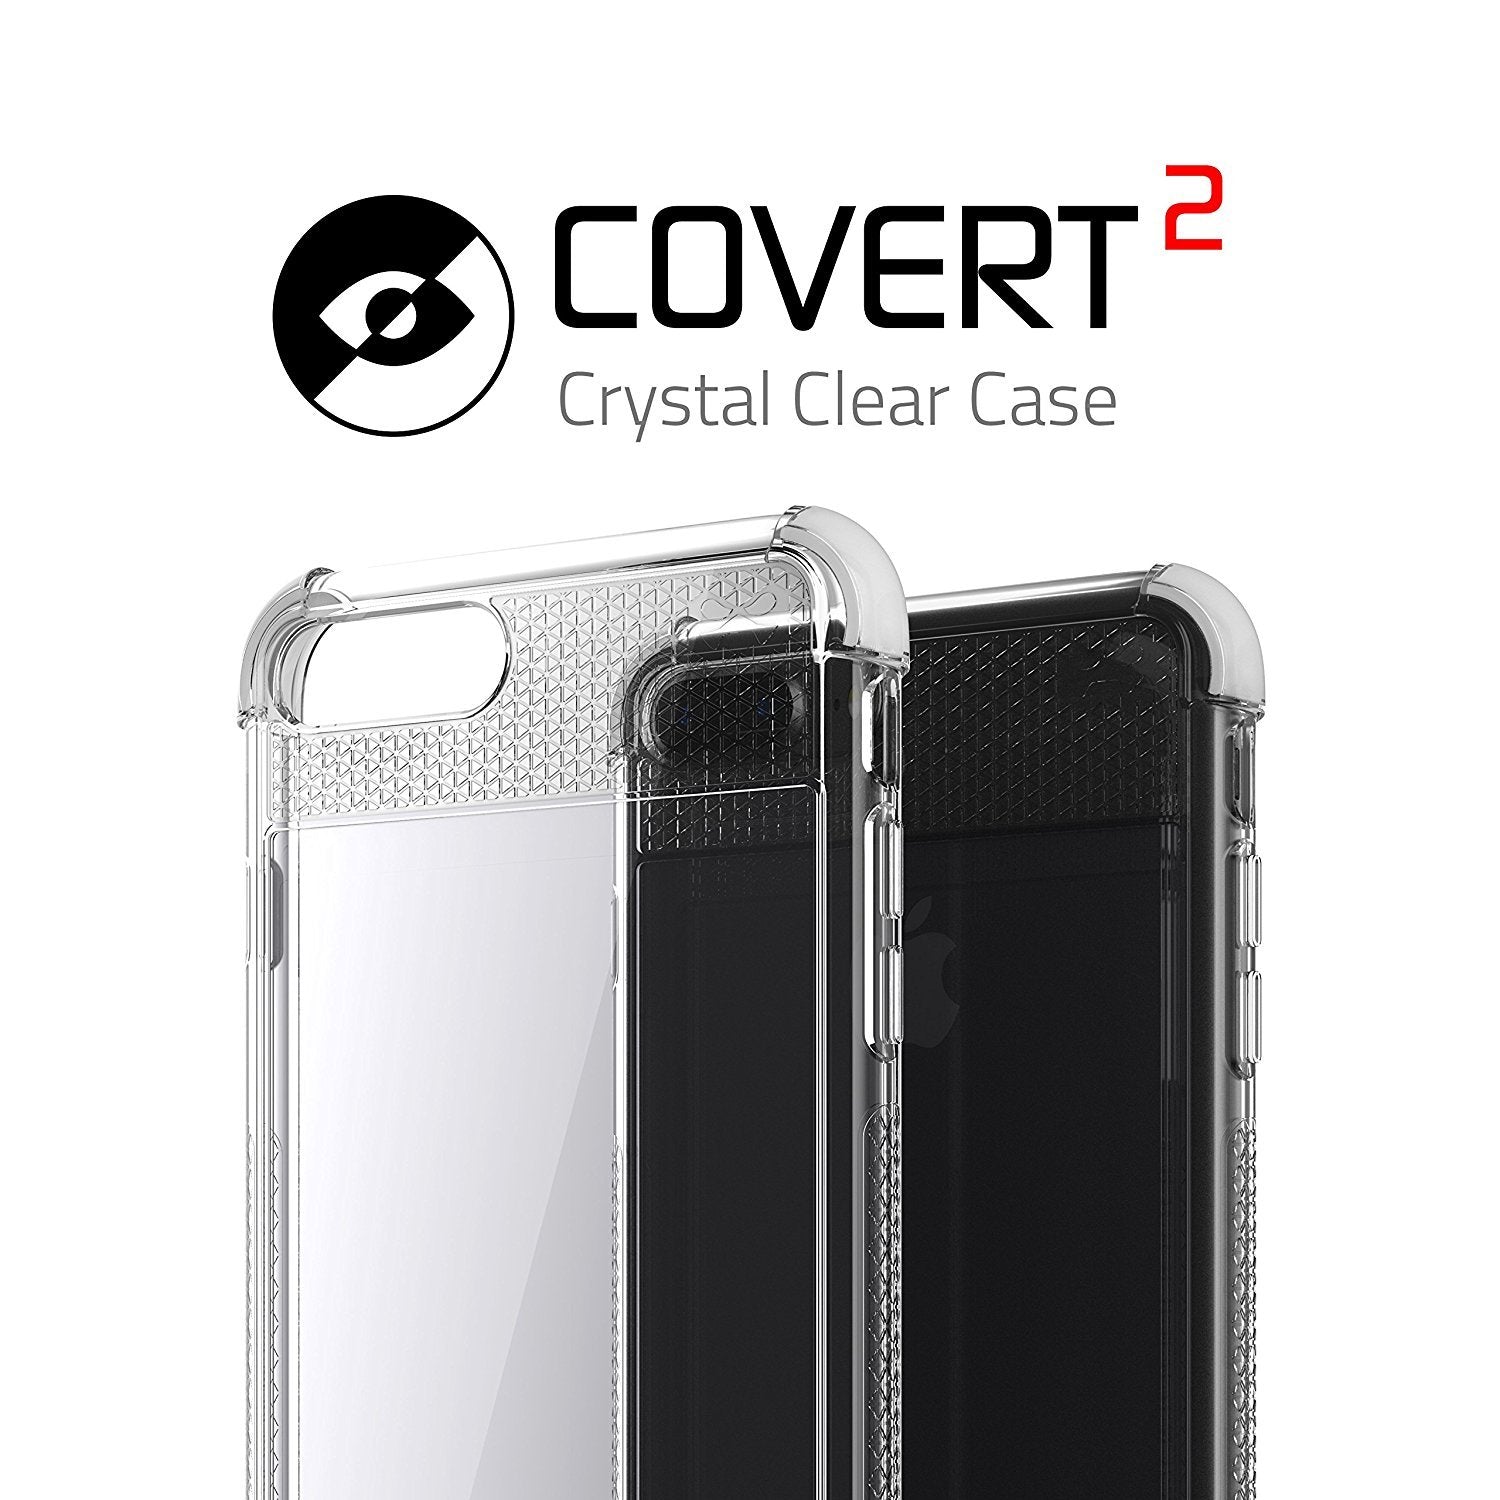 iPhone 7+ Plus Case, Ghostek Covert 2 Series for iPhone 7+ Plus Protective Case [ White]